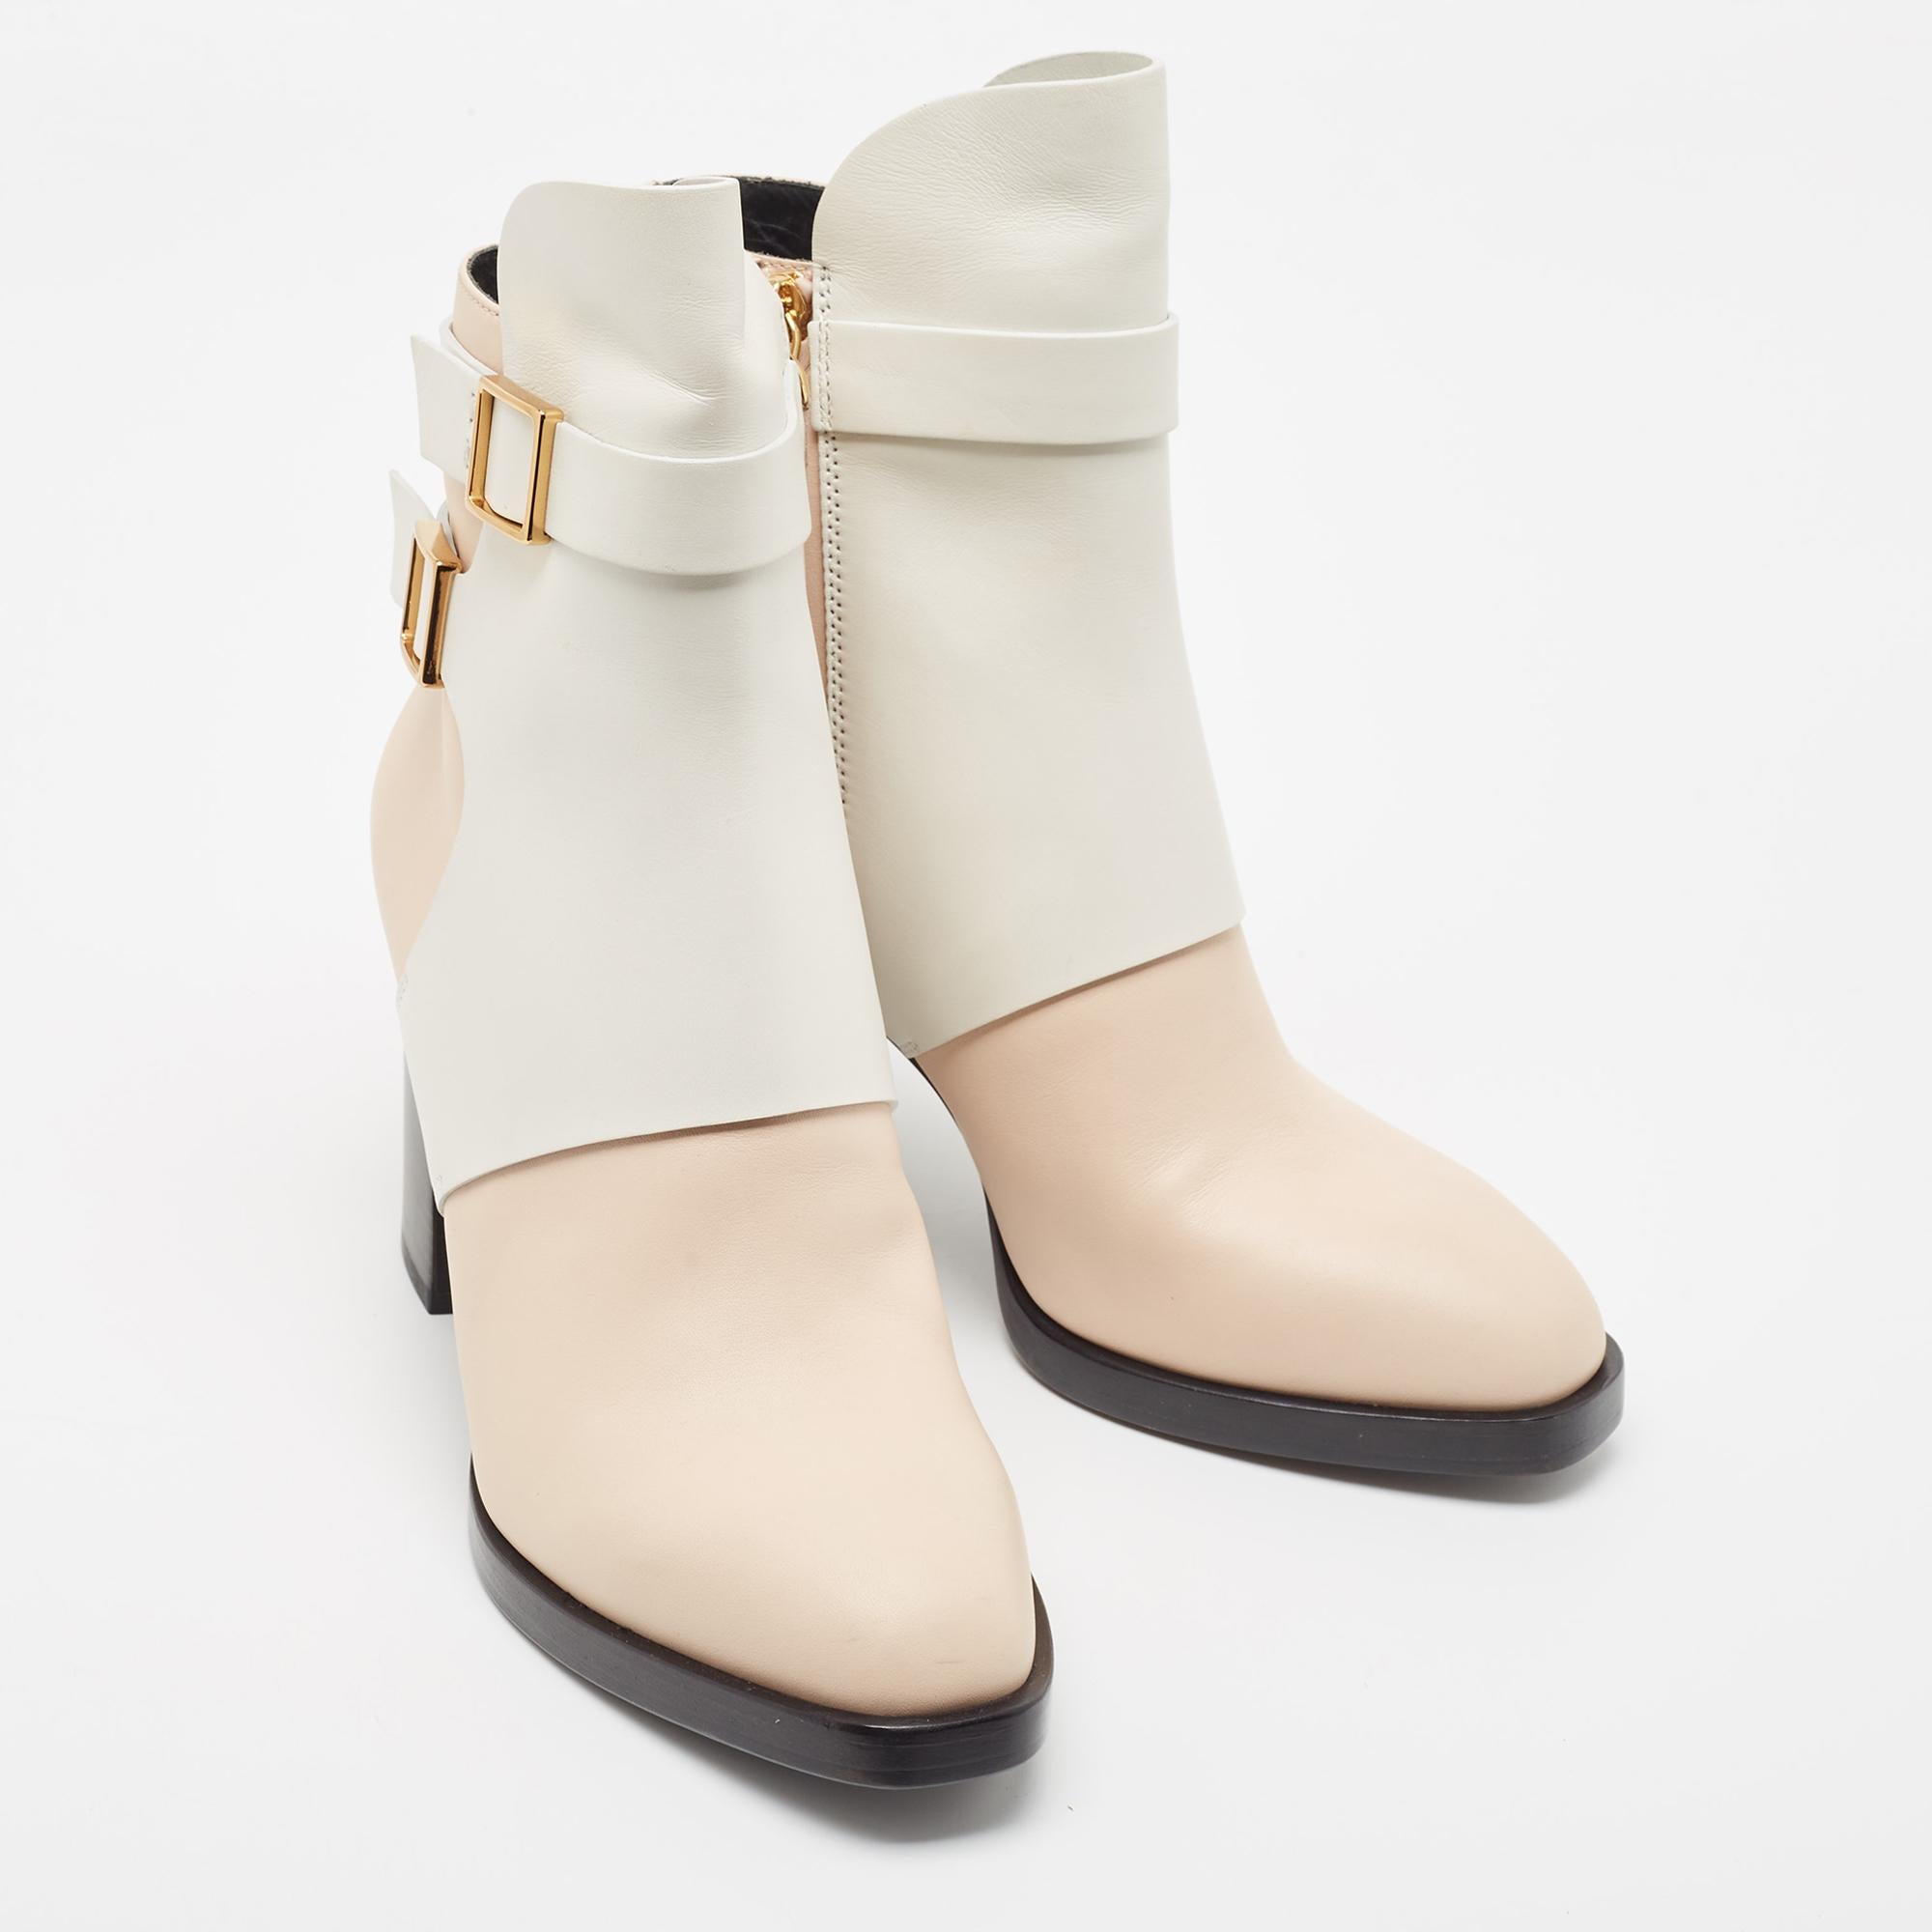 Tod's White/Beige Leather Buckle Detail Block Heel Ankle Boots Size 38.5 3